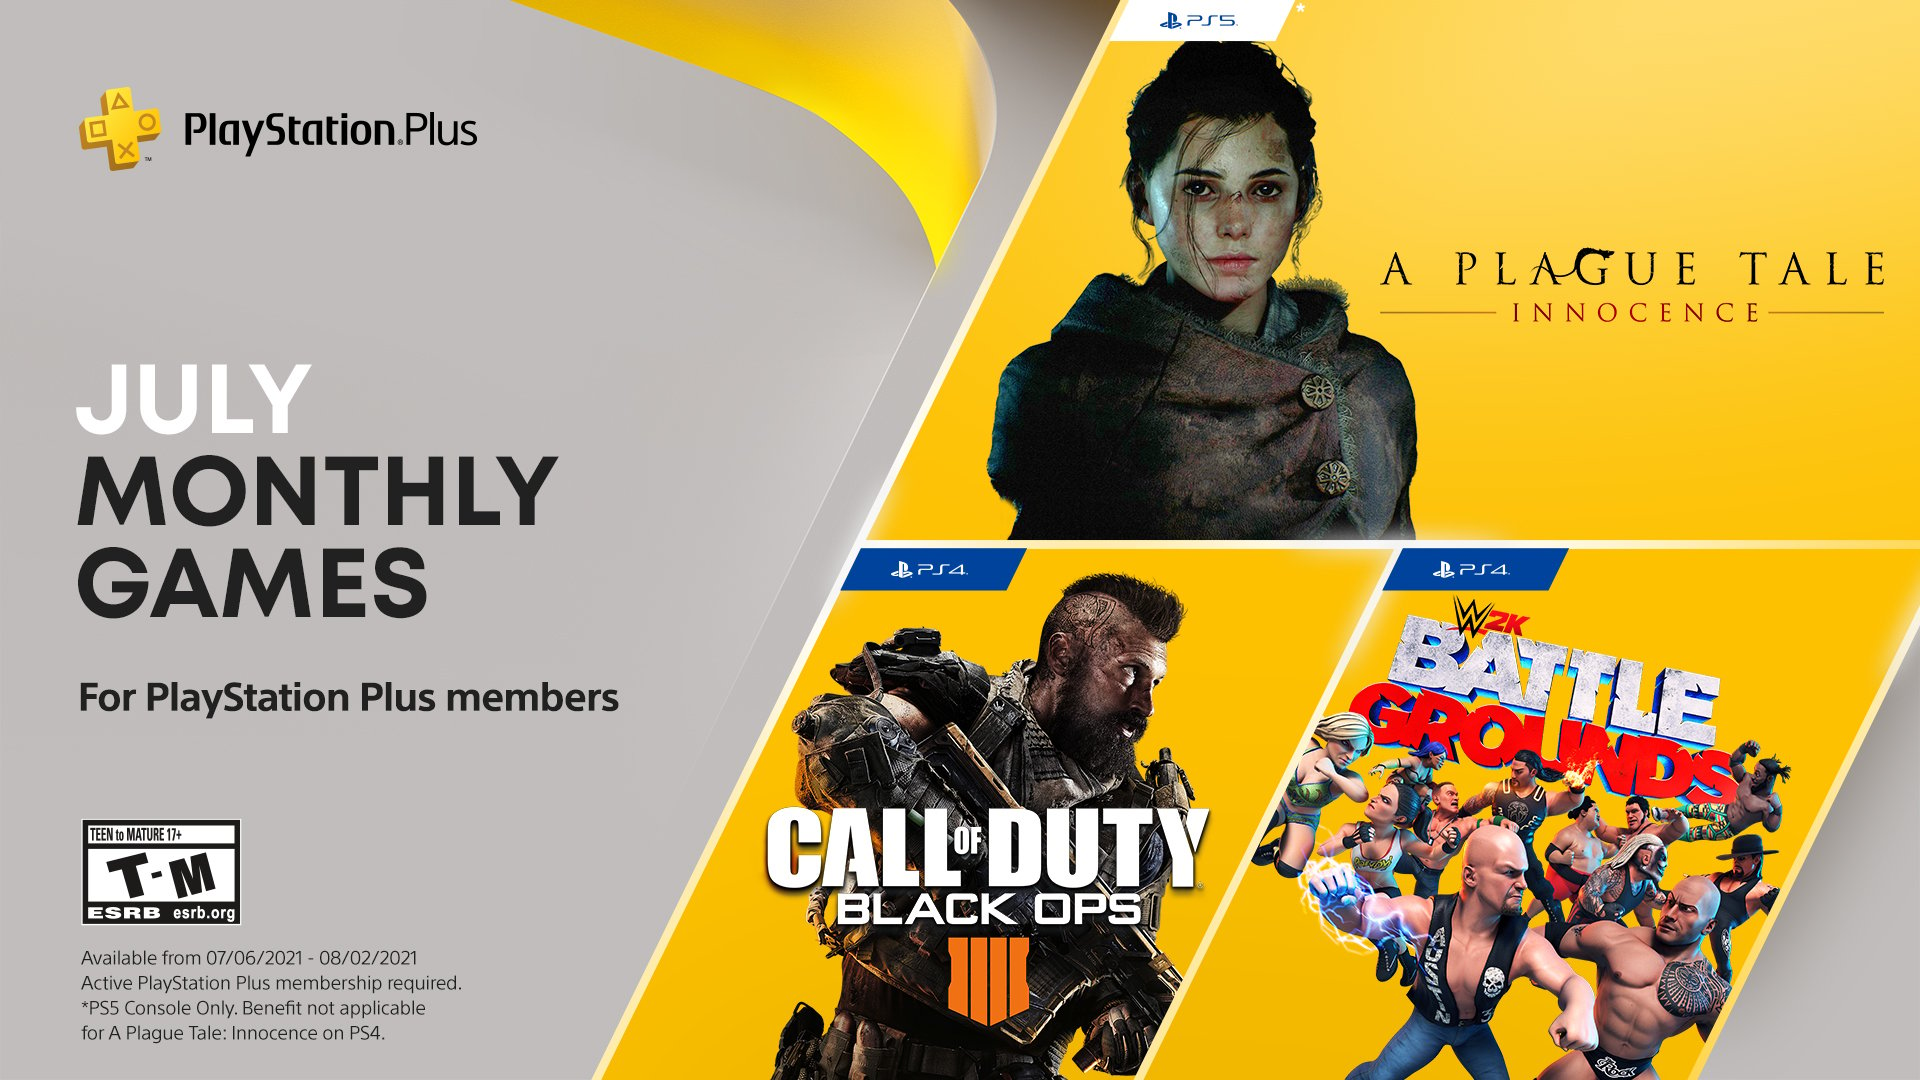 Xbox Live Gold free games for July 2022 announced - Gematsu